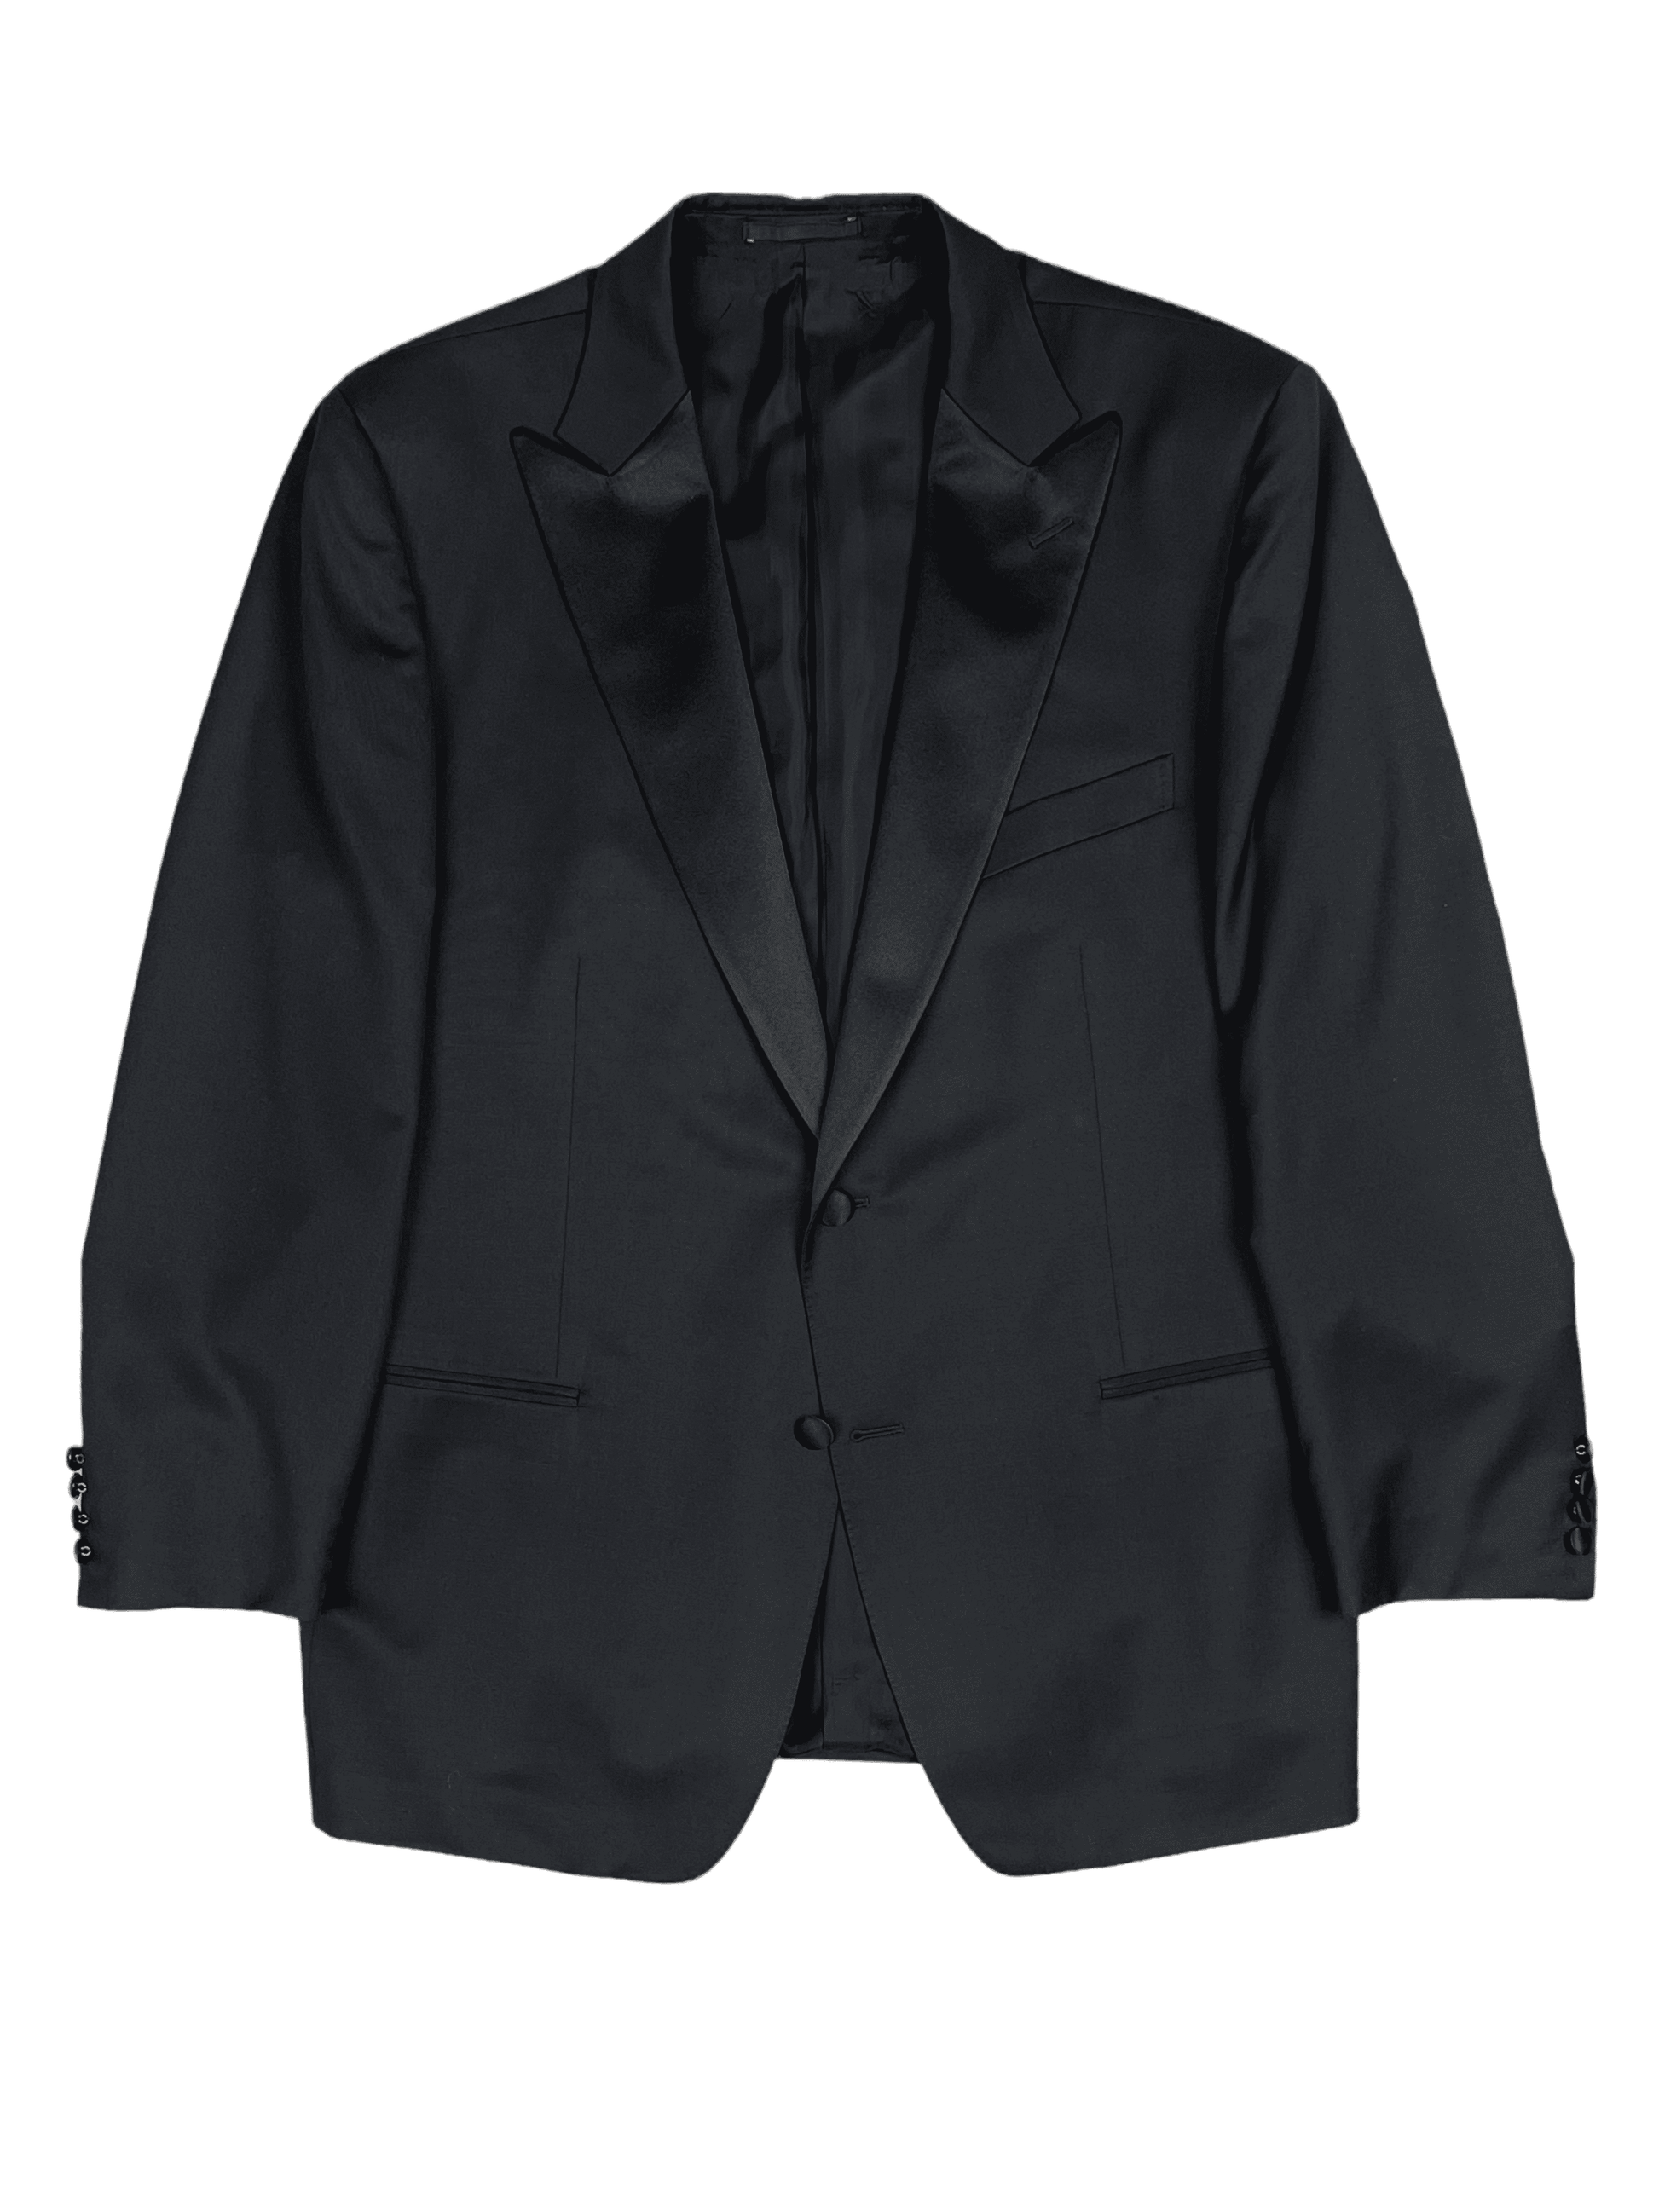 Z Zegna Black Wool Tuxedo 46R - Genuine Design Luxury Consignment for Men. New & Pre-Owned Clothing, Shoes, & Accessories. Calgary, Canada